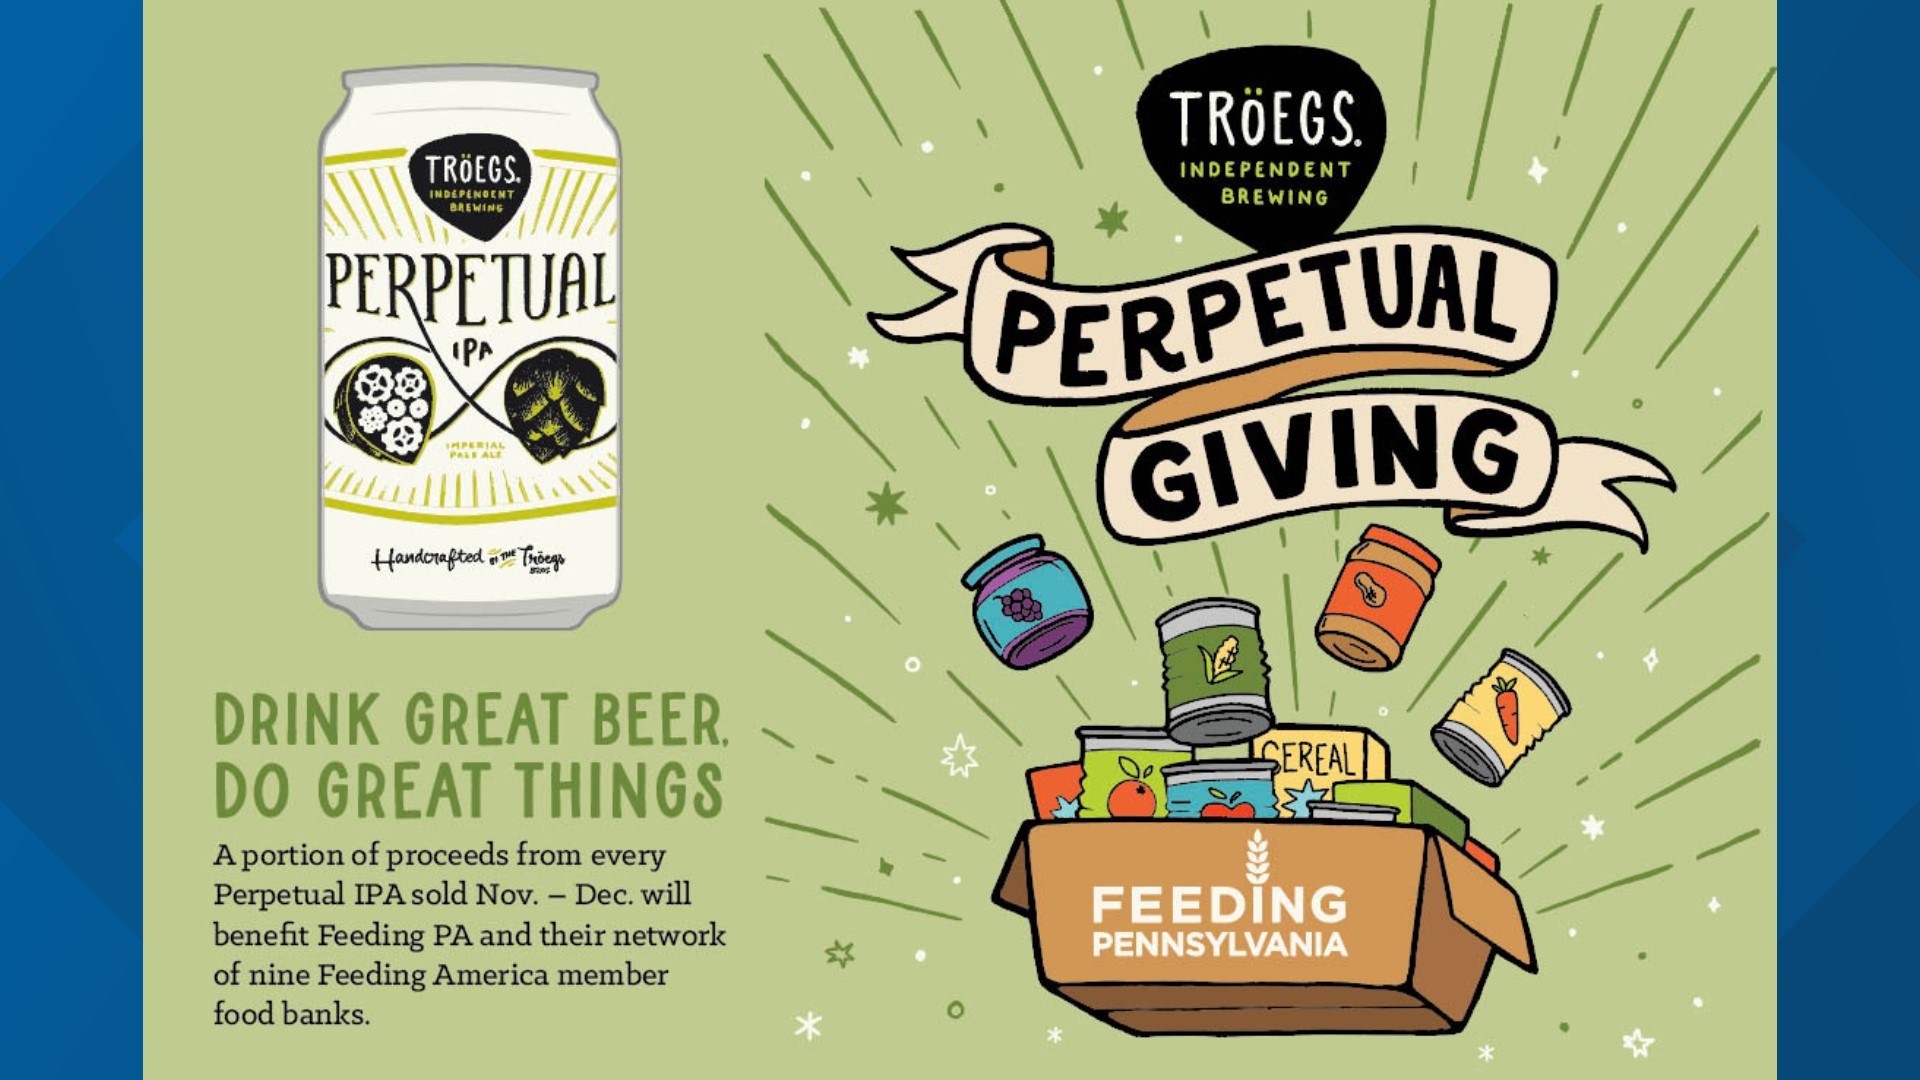 Tröegs announced on Wednesday its partnership with Feeding Pennsylvania to raise funding for local food pantries - all through sales of its popular Perpetual IPA.